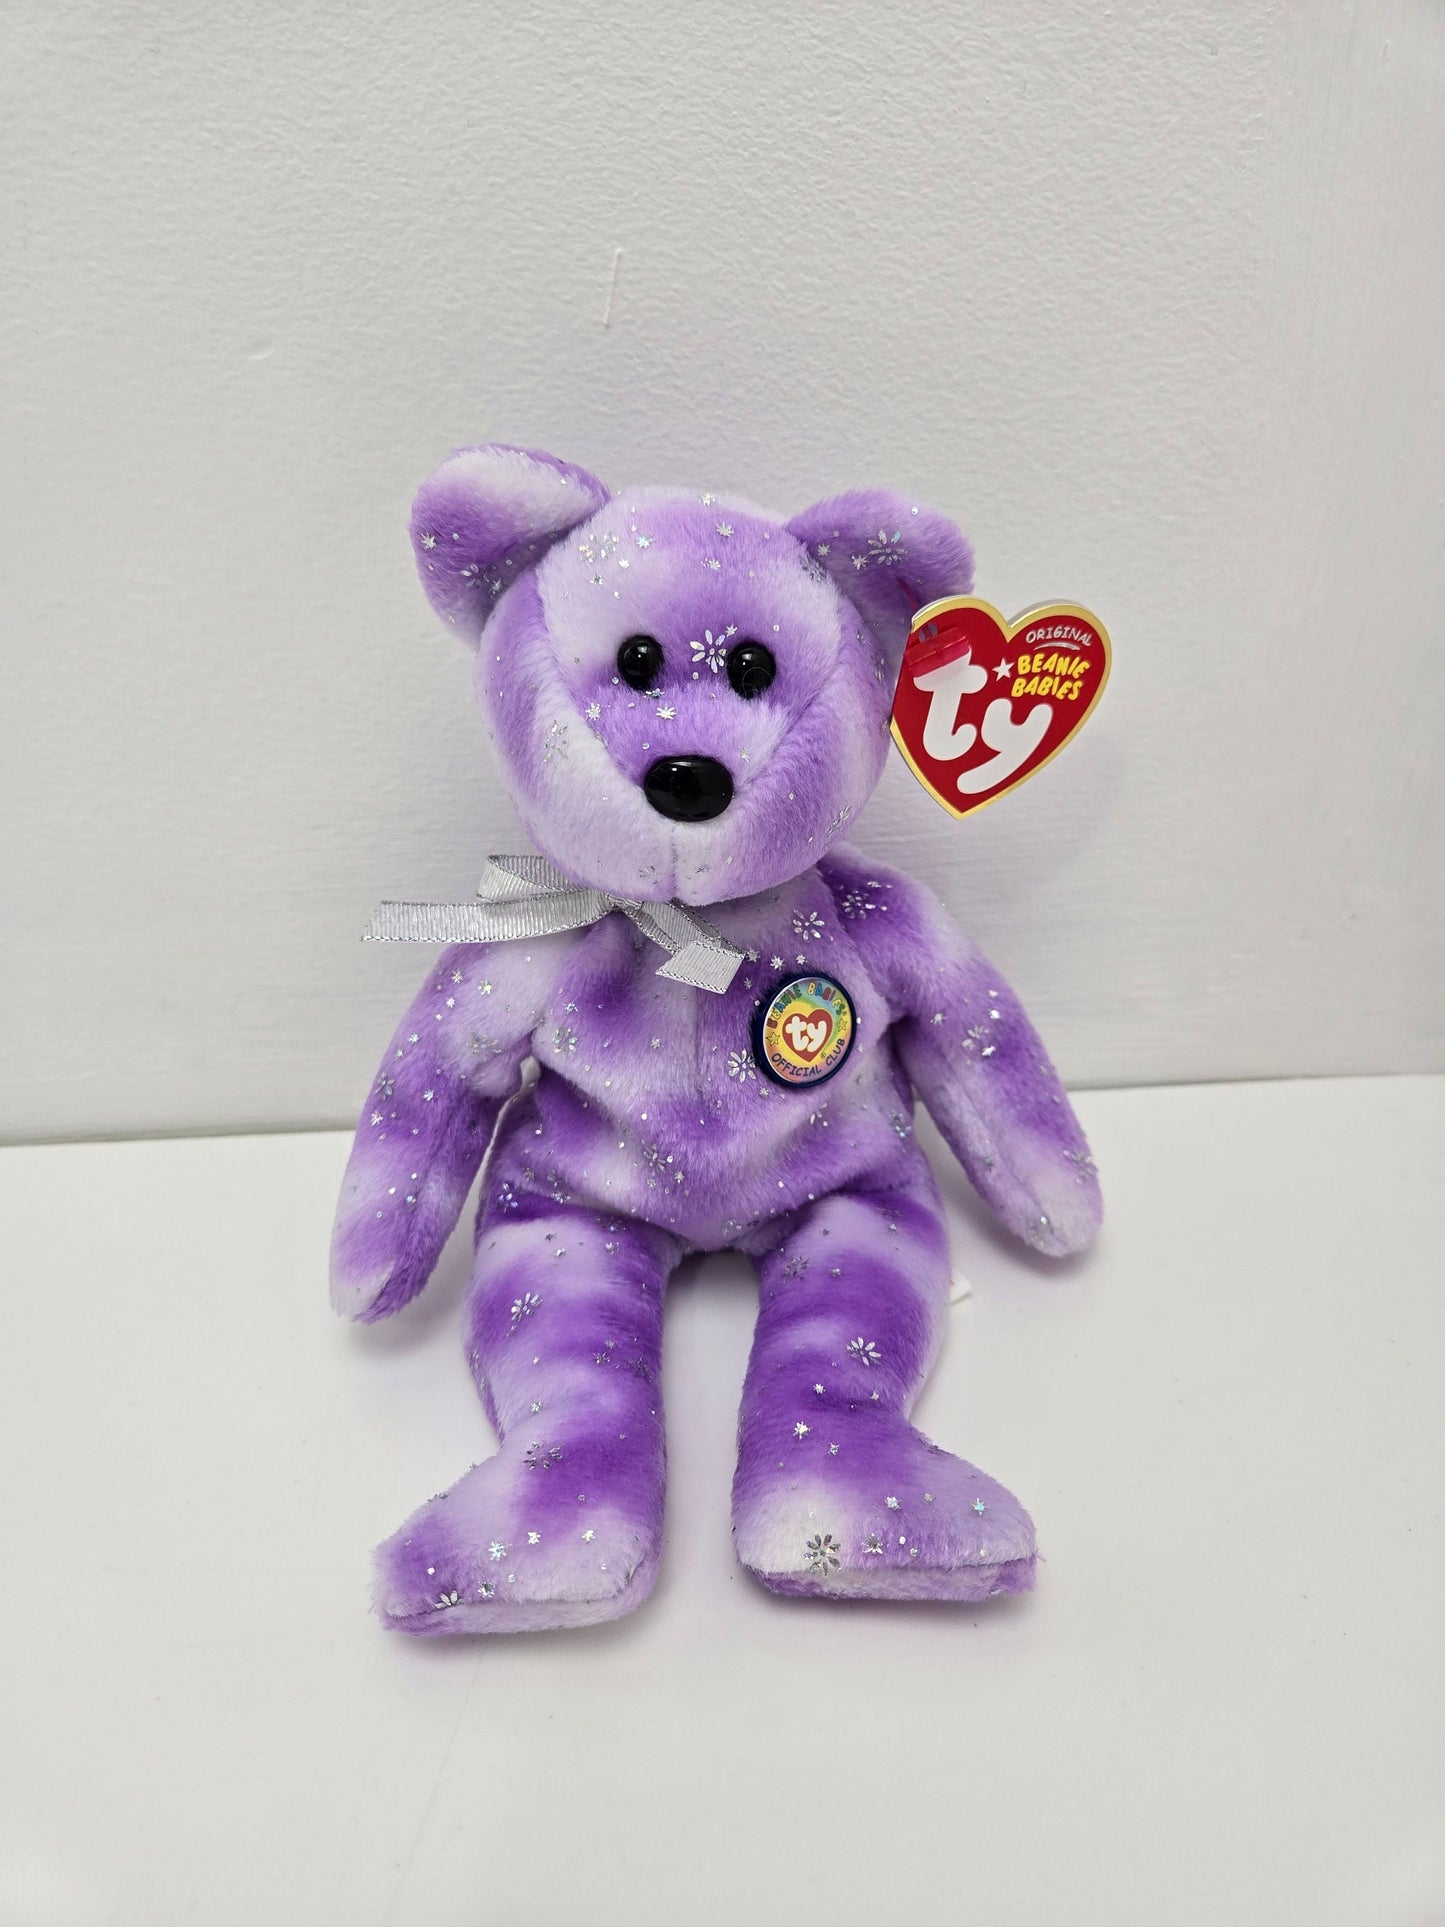 TY Beanie Baby “Clubby 8” the Bear - Internet Exclusive *Rare* (8.5 inch)